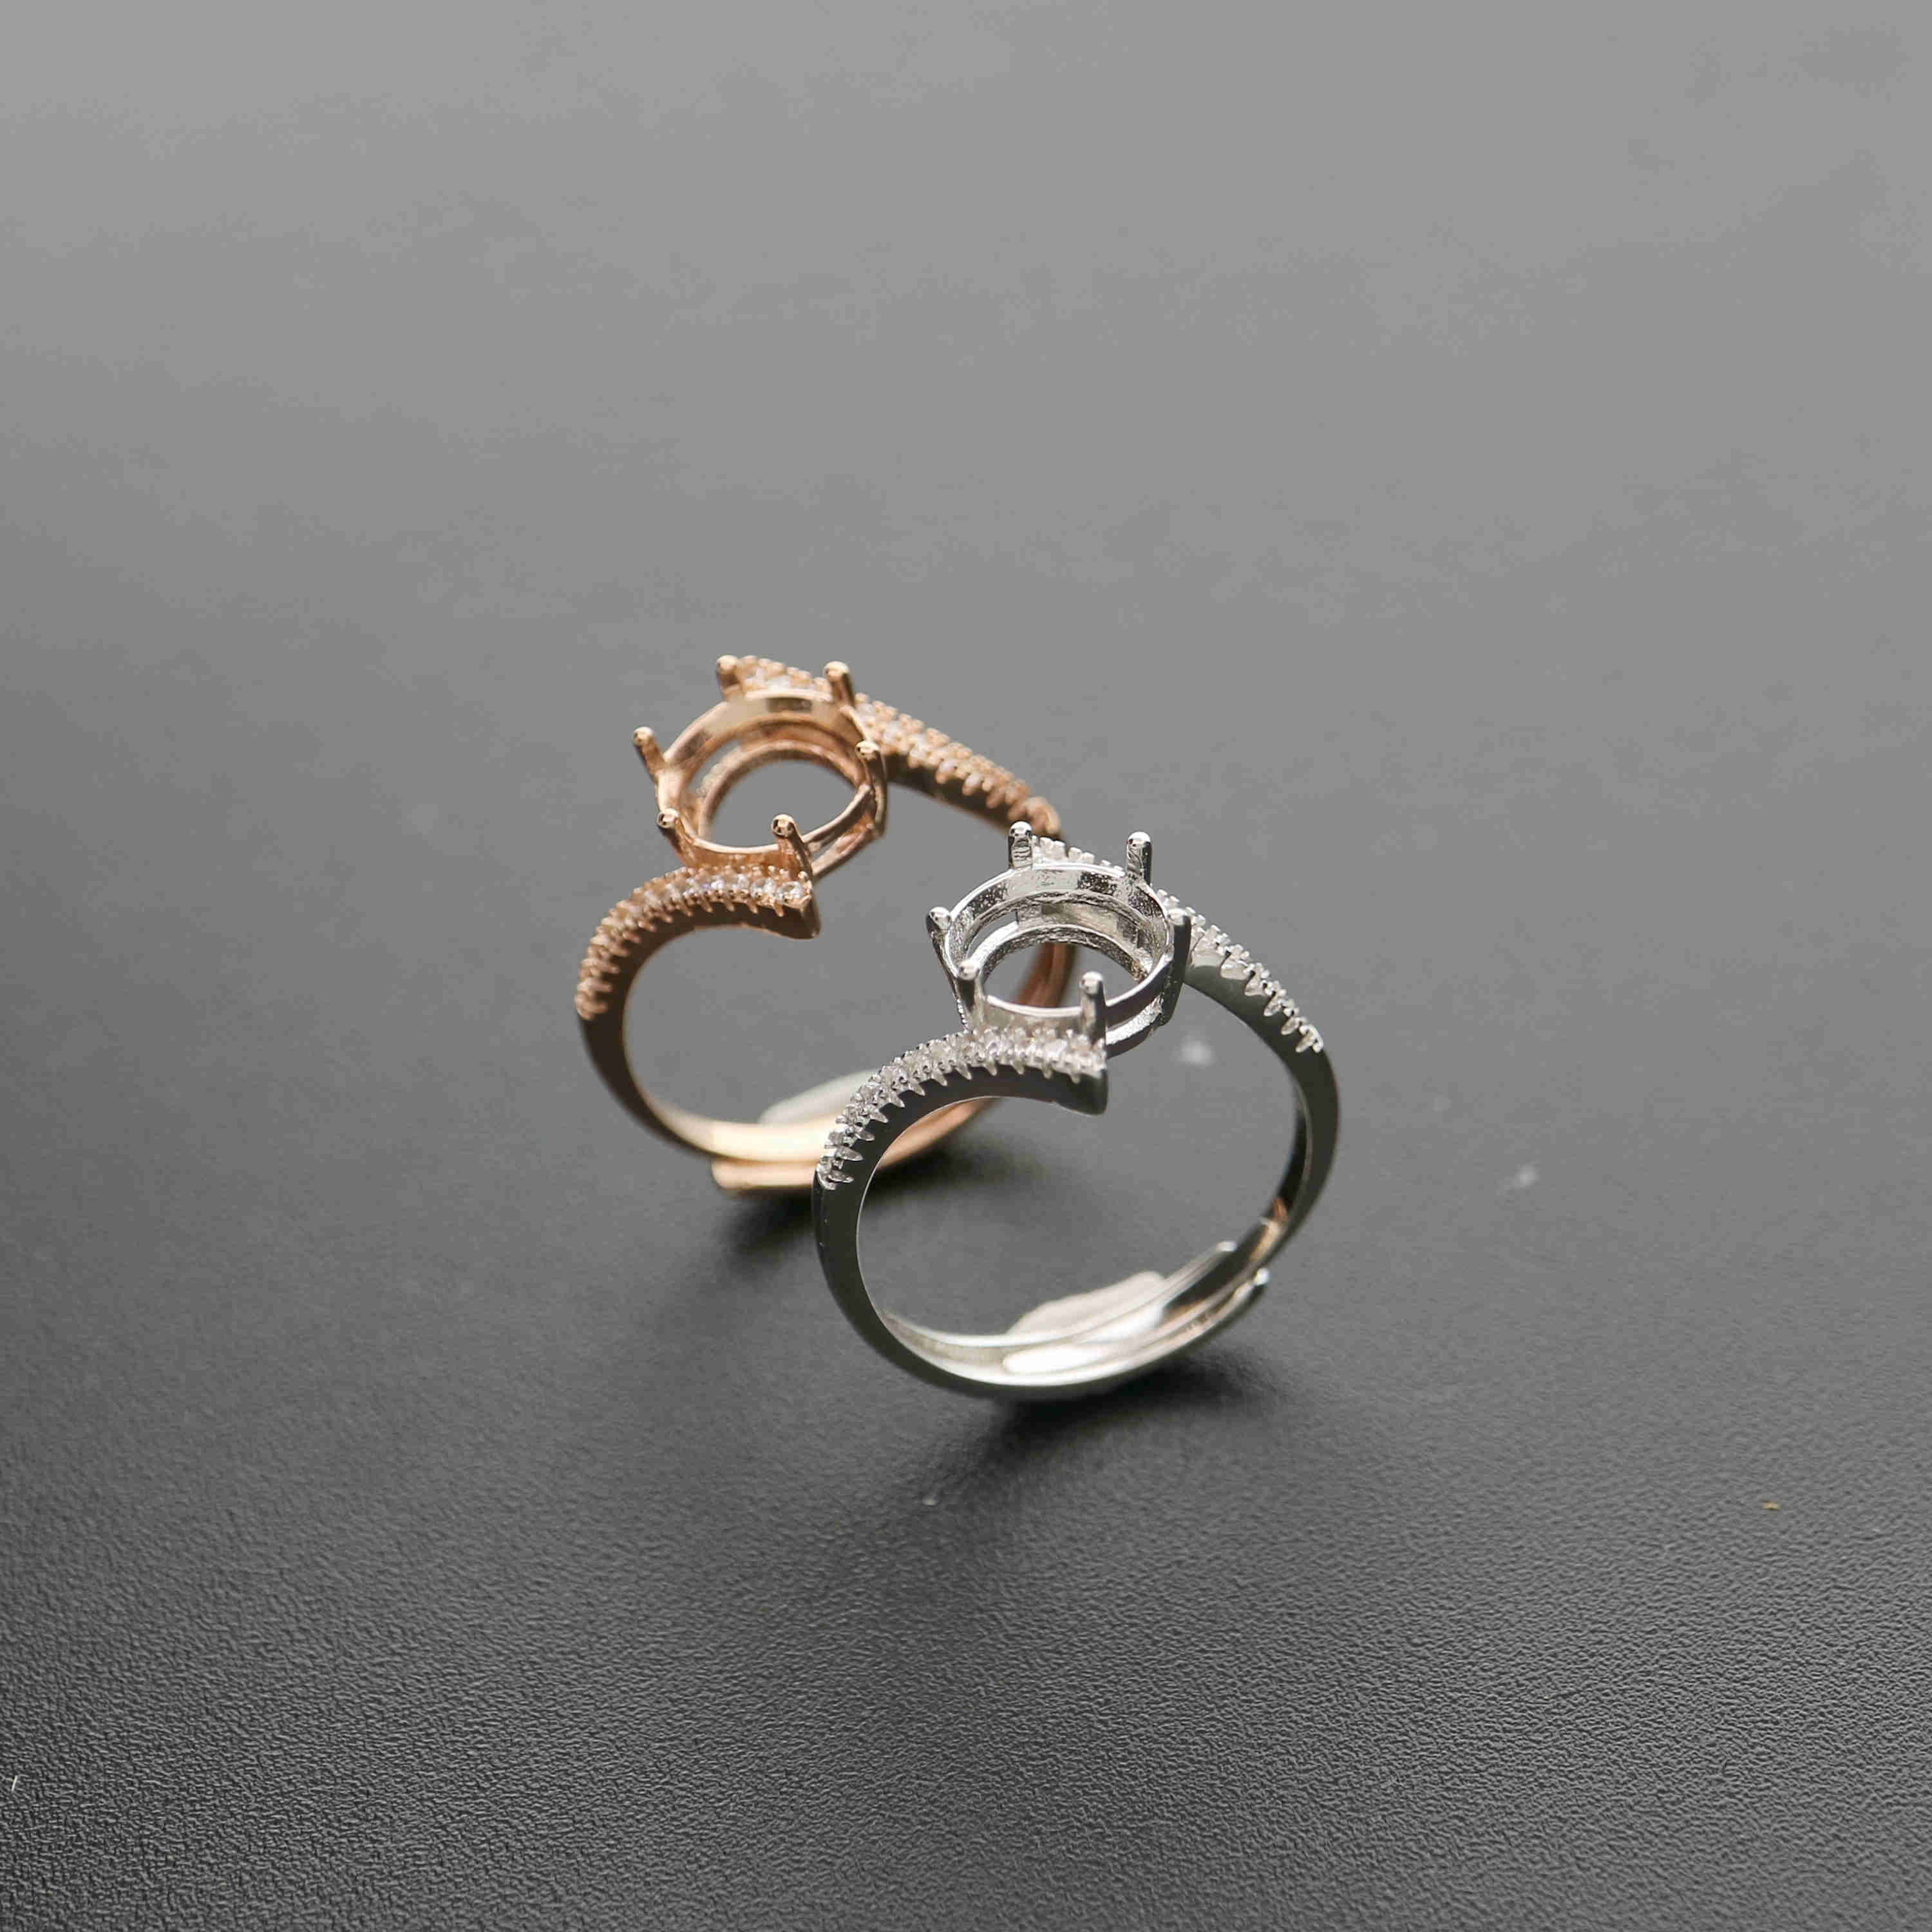 1Pcs 7/8MM Round Simple Rose Gold Silver Gems Cz Stone Prong Bezel Solid 925 Sterling Silver Adjustable Ring Settings 1210035 - Click Image to Close